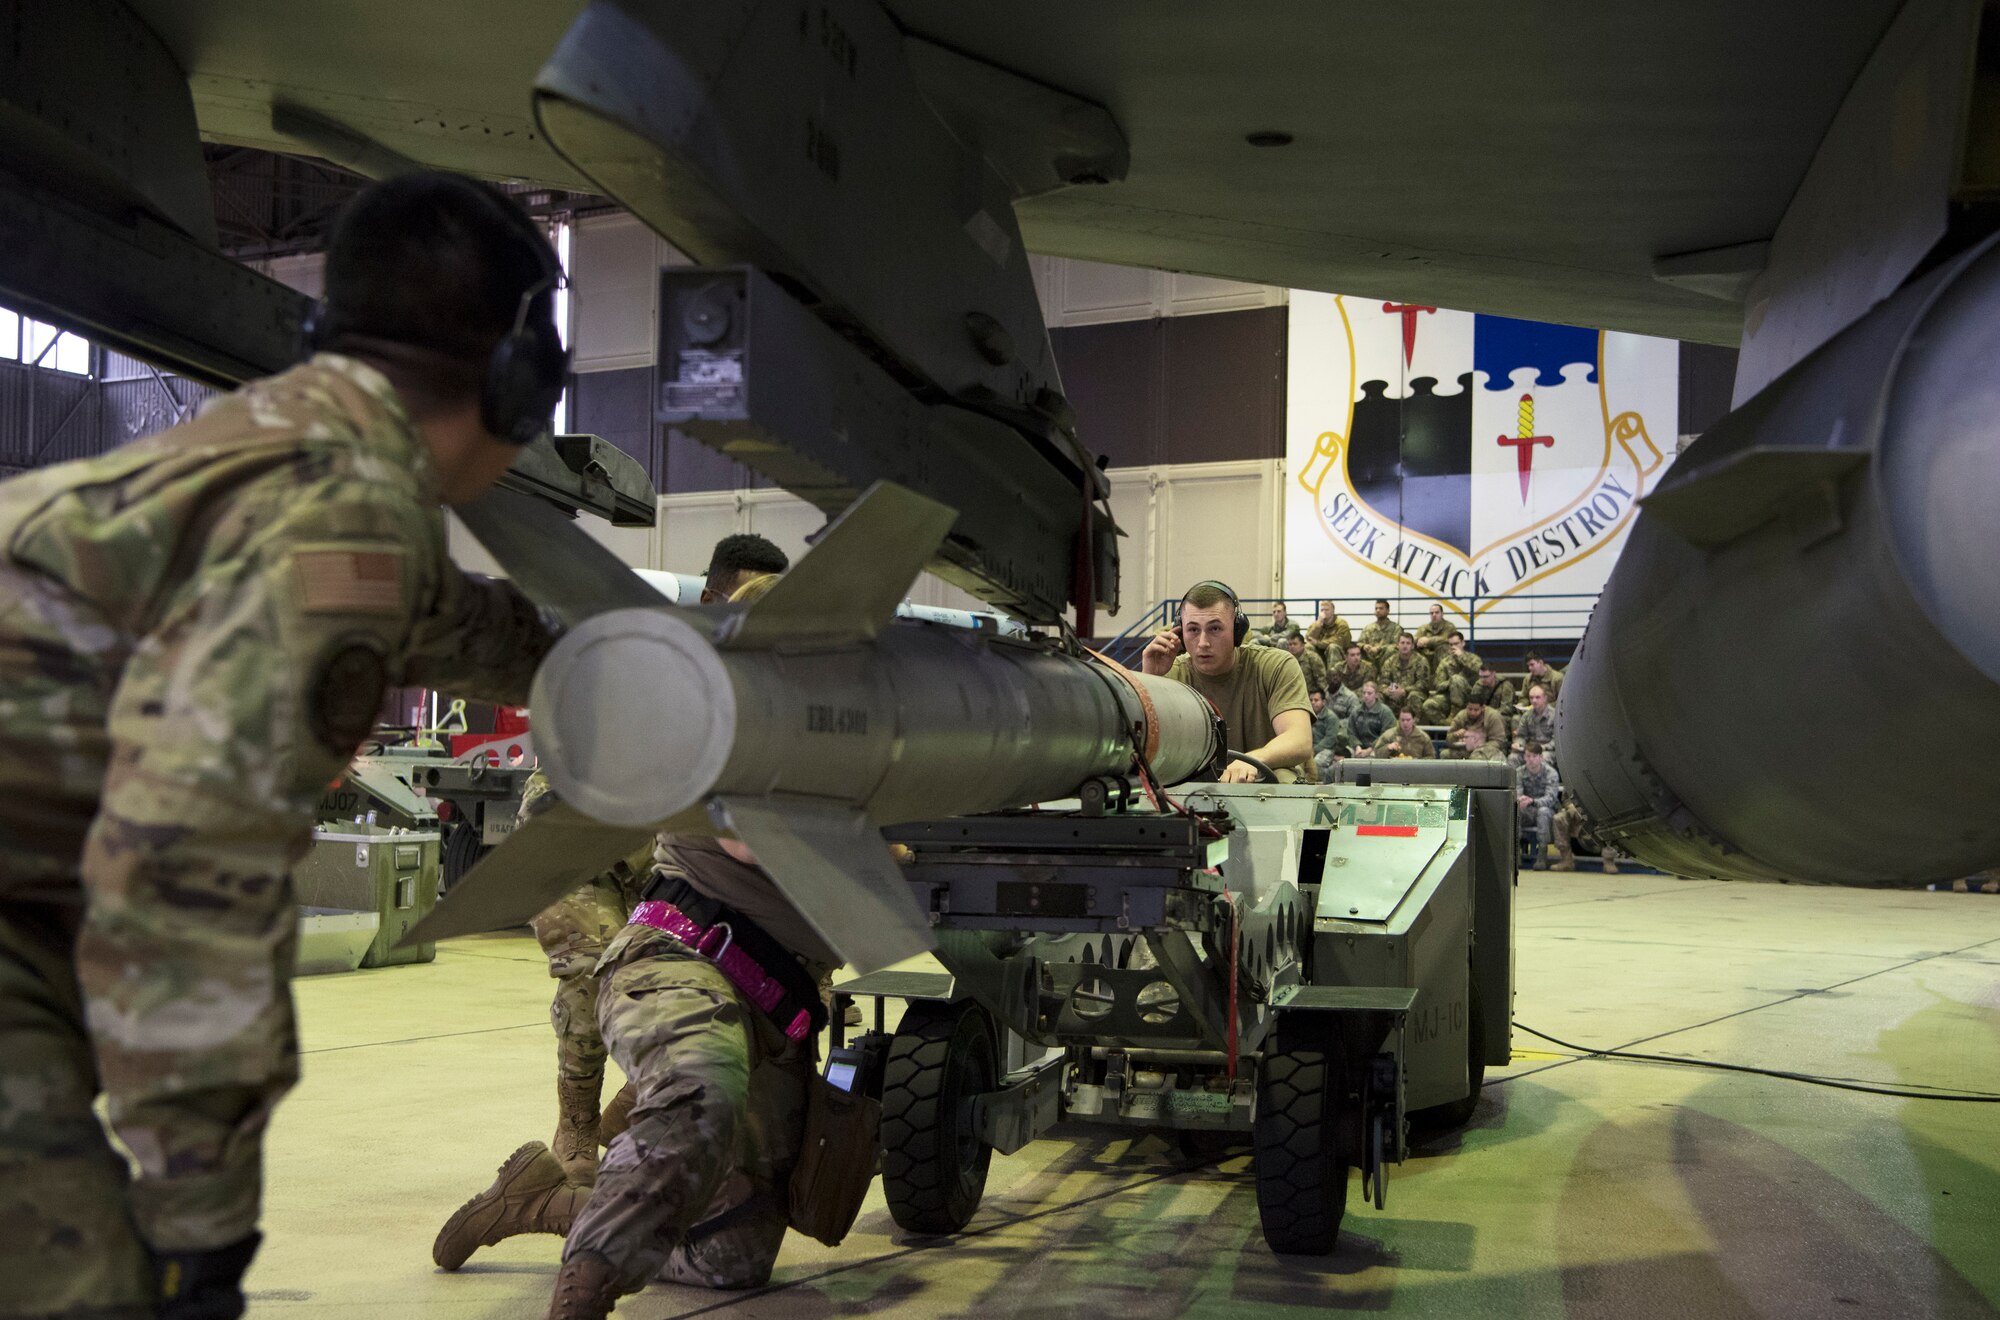 The competition required two teams of three Airmen to load weapons onto the wings of an F-16 Fighting Falcon as quickly and accurately as possible